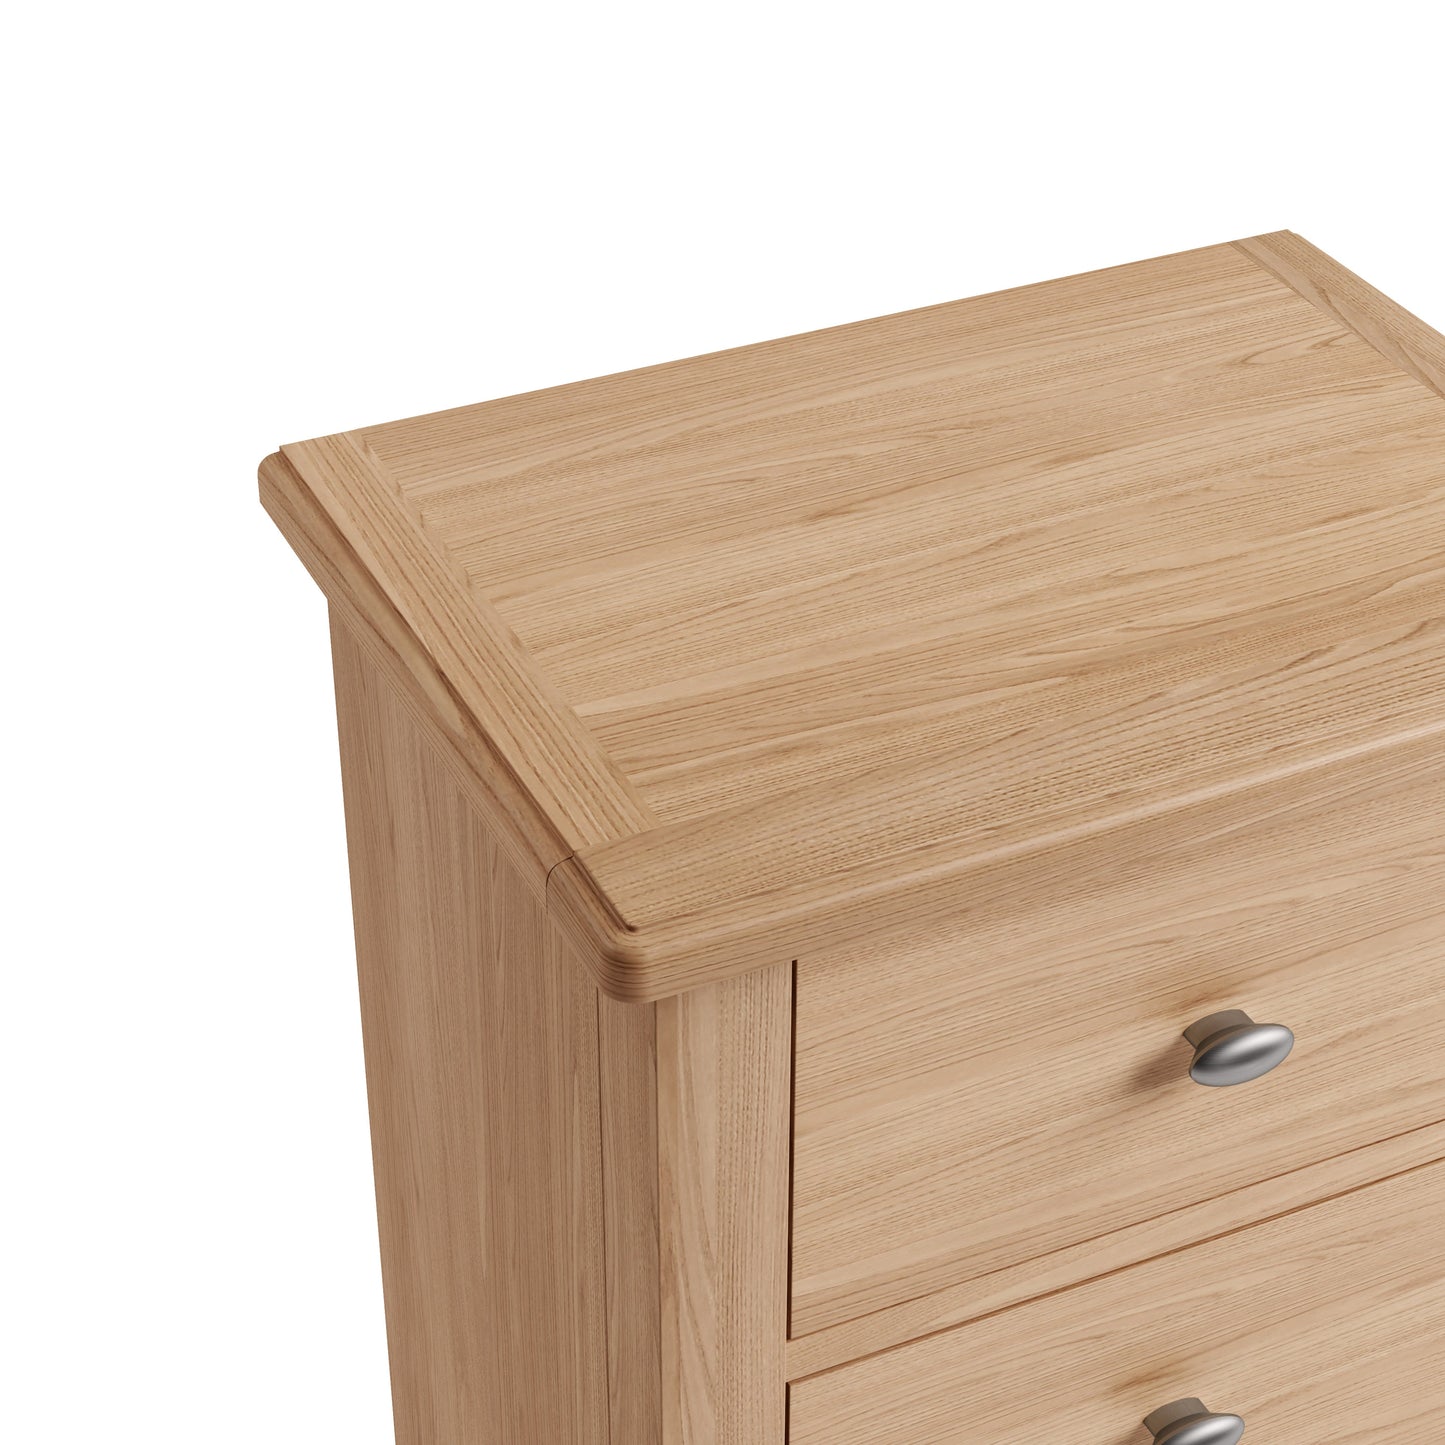 Guildford 5 Drawer Narrow Chest